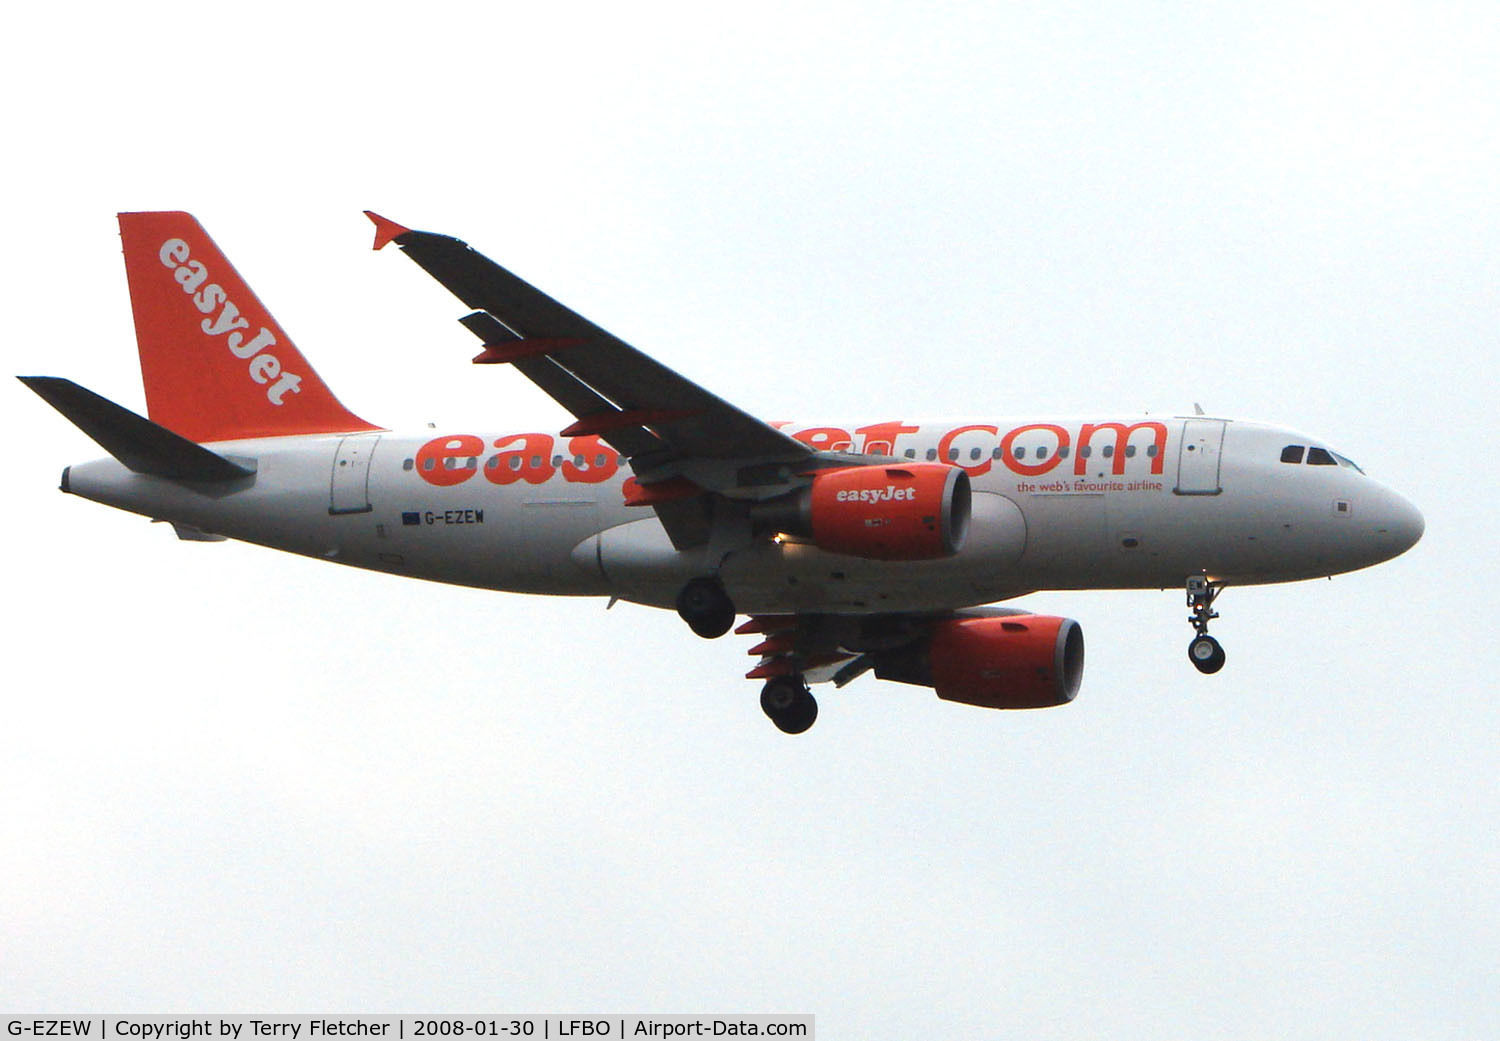 G-EZEW, 2004 Airbus A319-111 C/N 2300, Easyjet A319 arrives at Toulouse